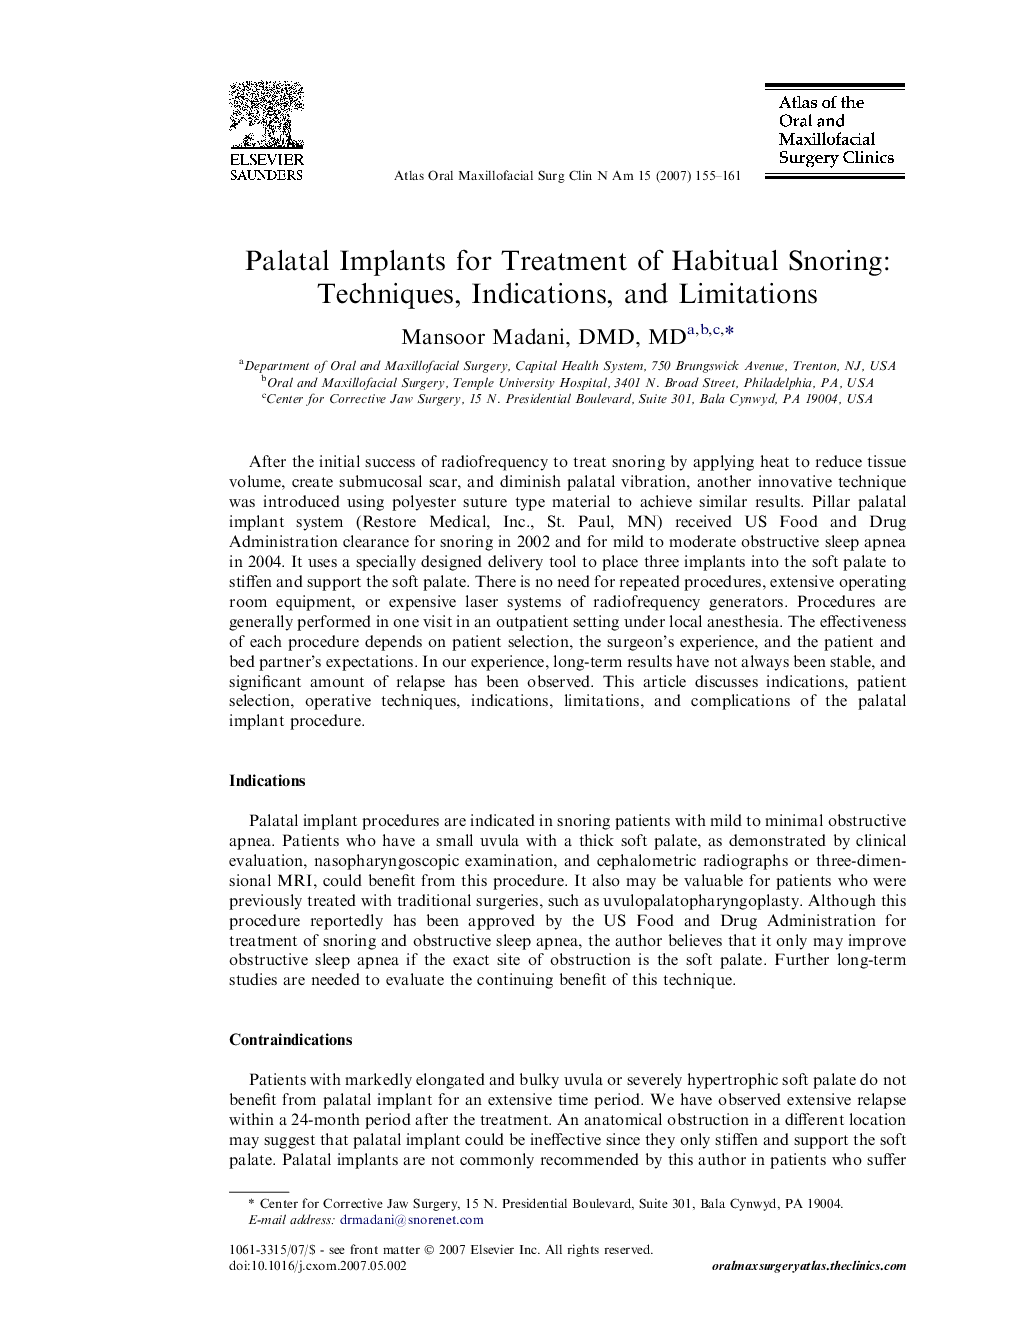 Palatal Implants for Treatment of Habitual Snoring: Techniques, Indications, and Limitations